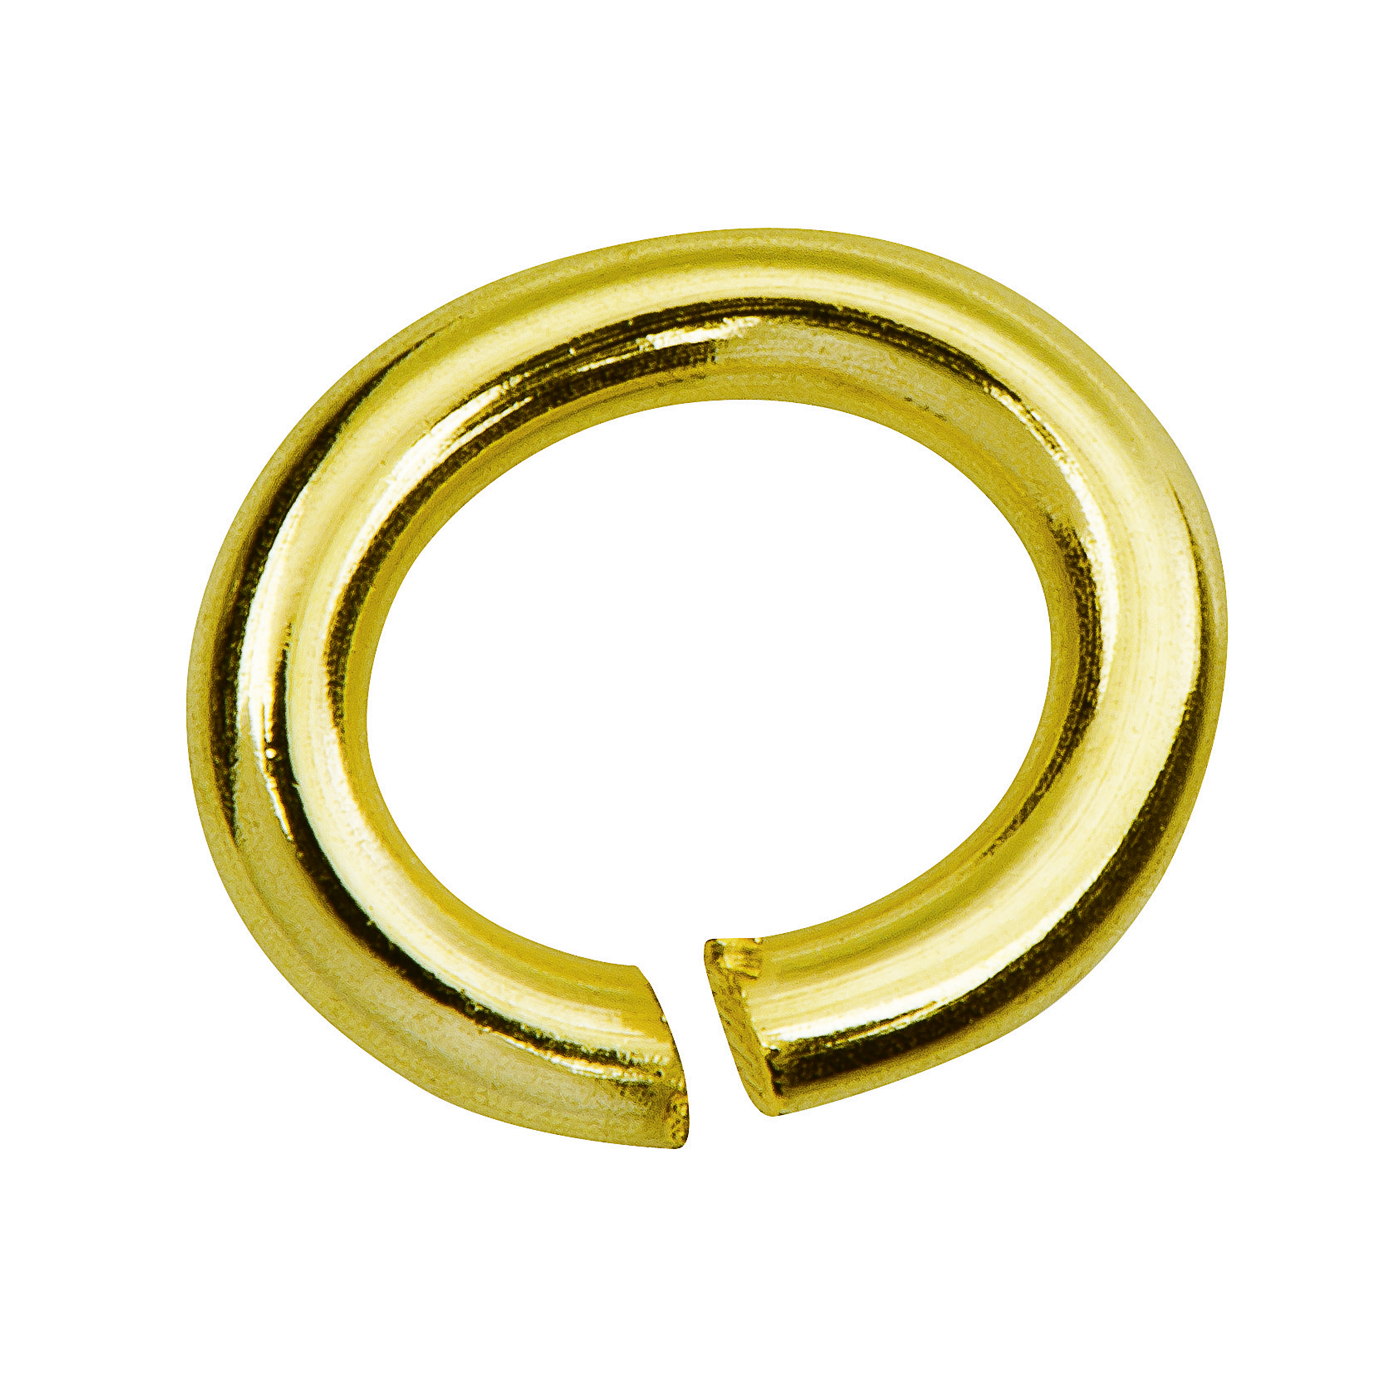 Binding Rings, oval, 750G, ø 7 mm - 2 pieces